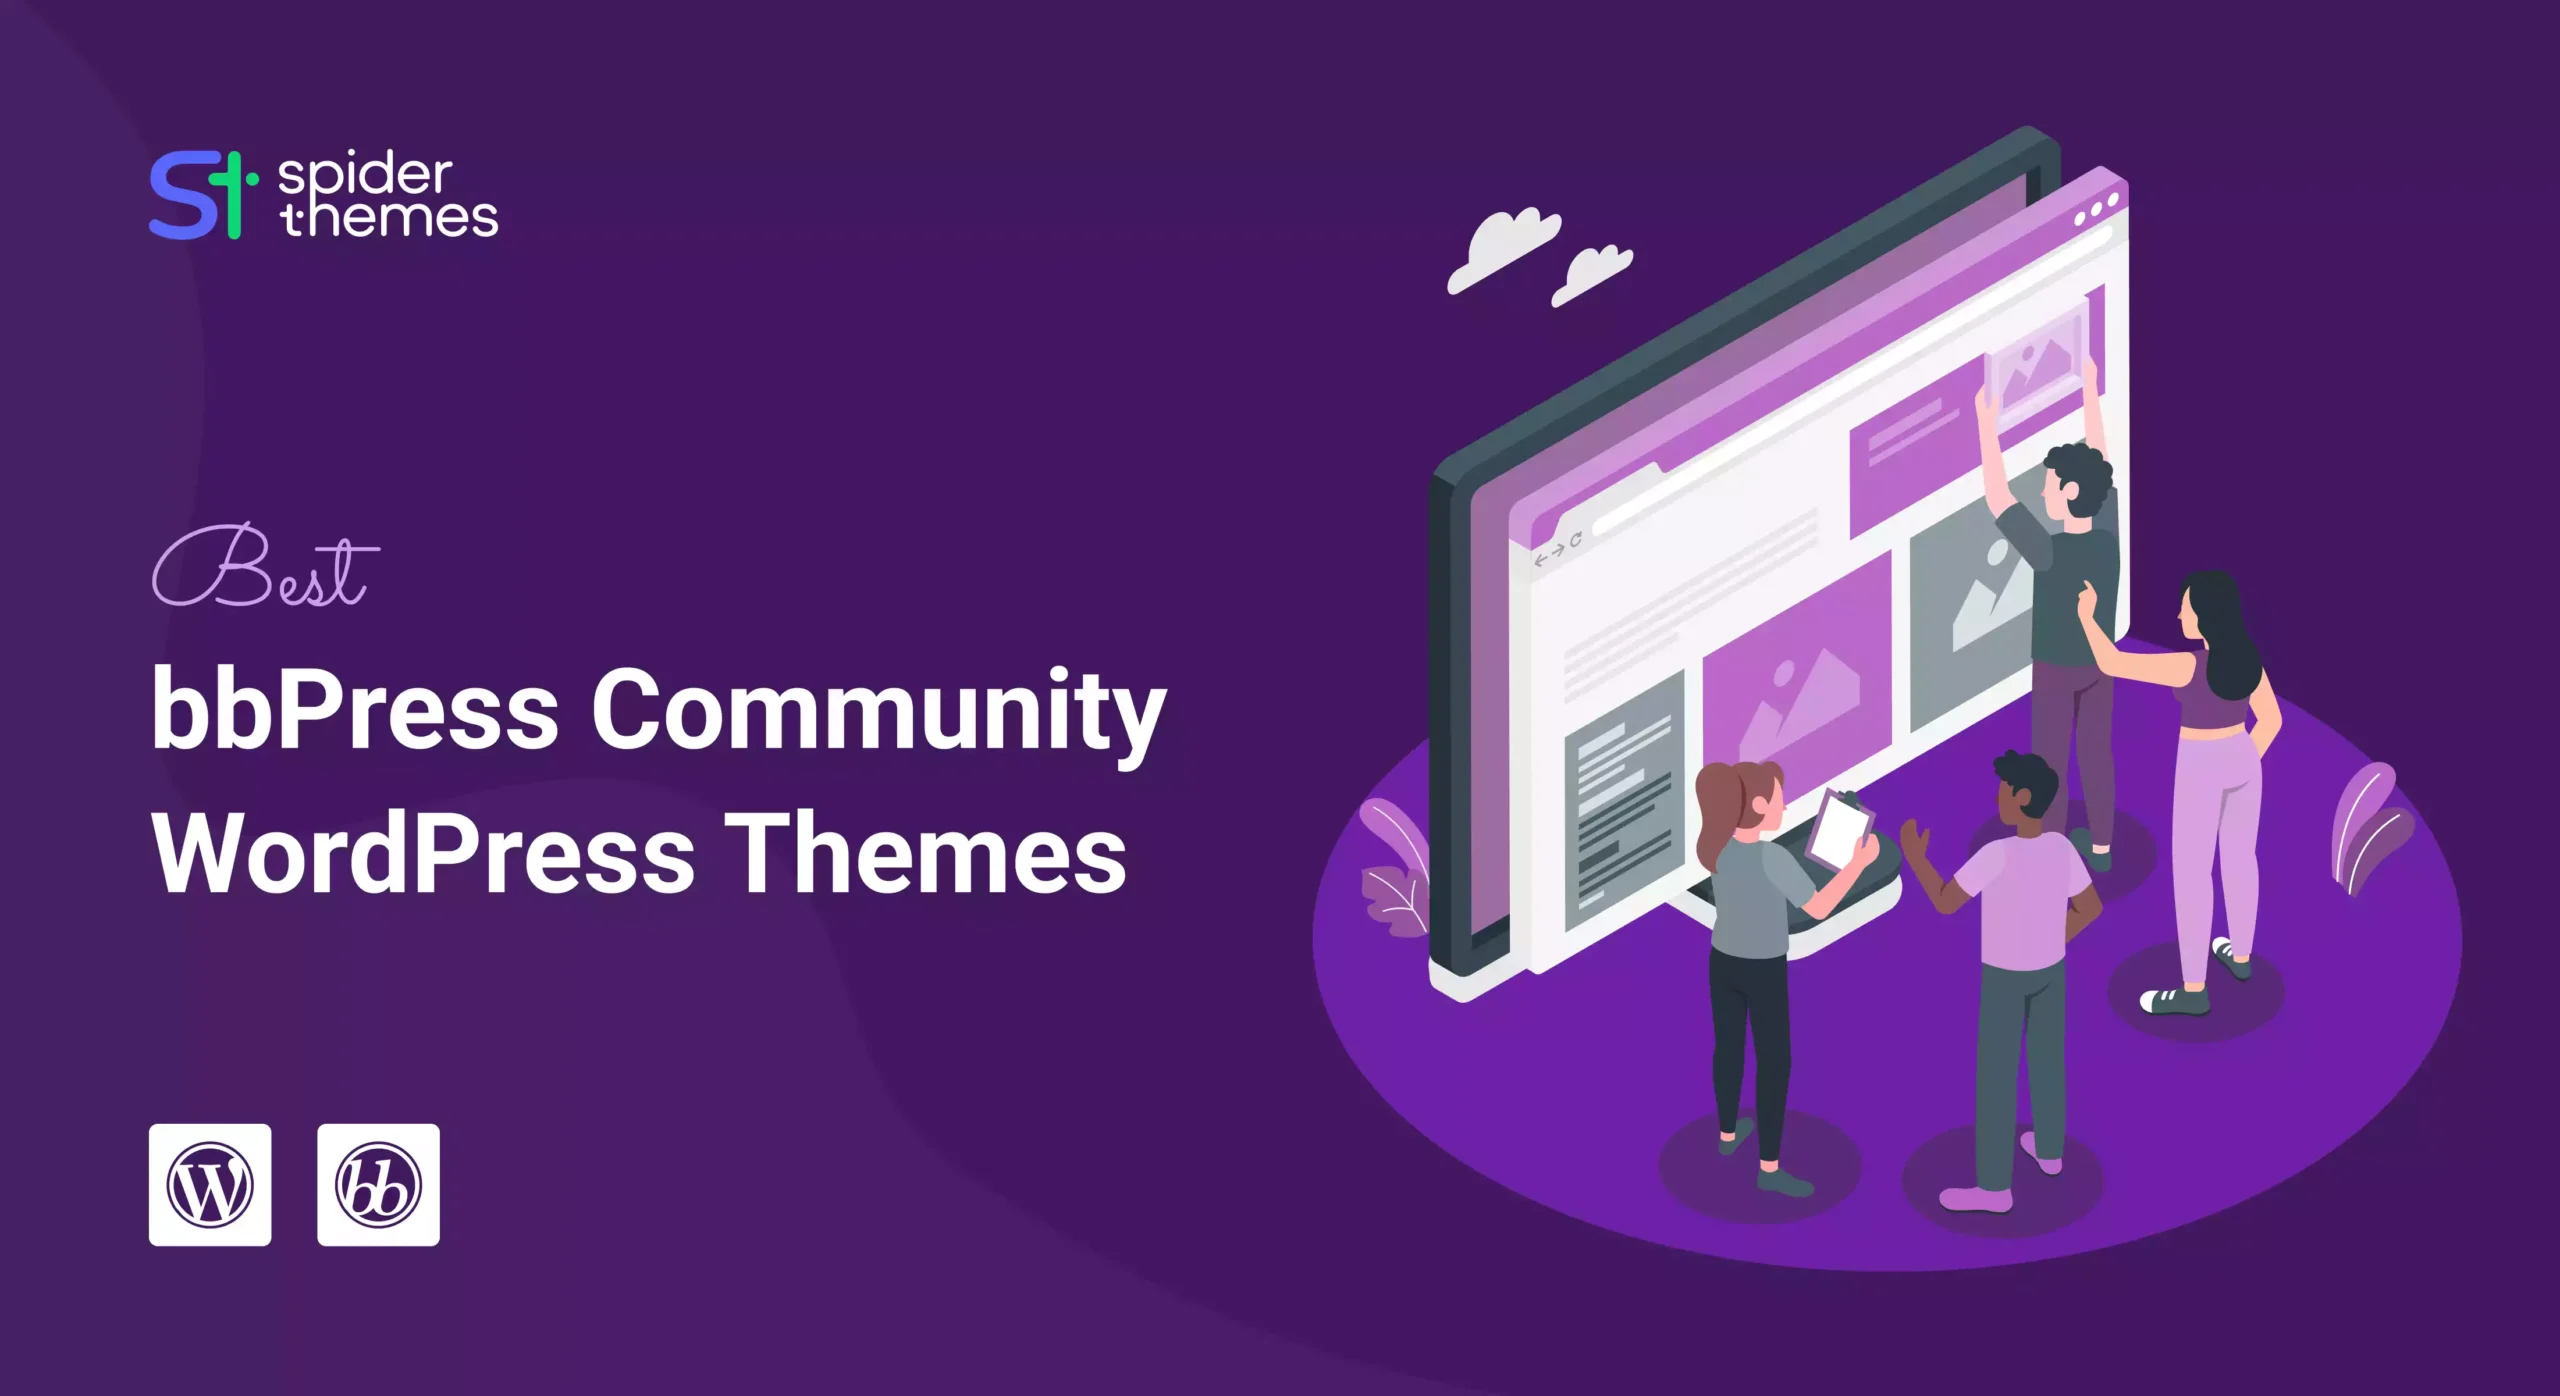 Get the Best bbPress Community WordPress Themes for Creating Powerful Networking Websites